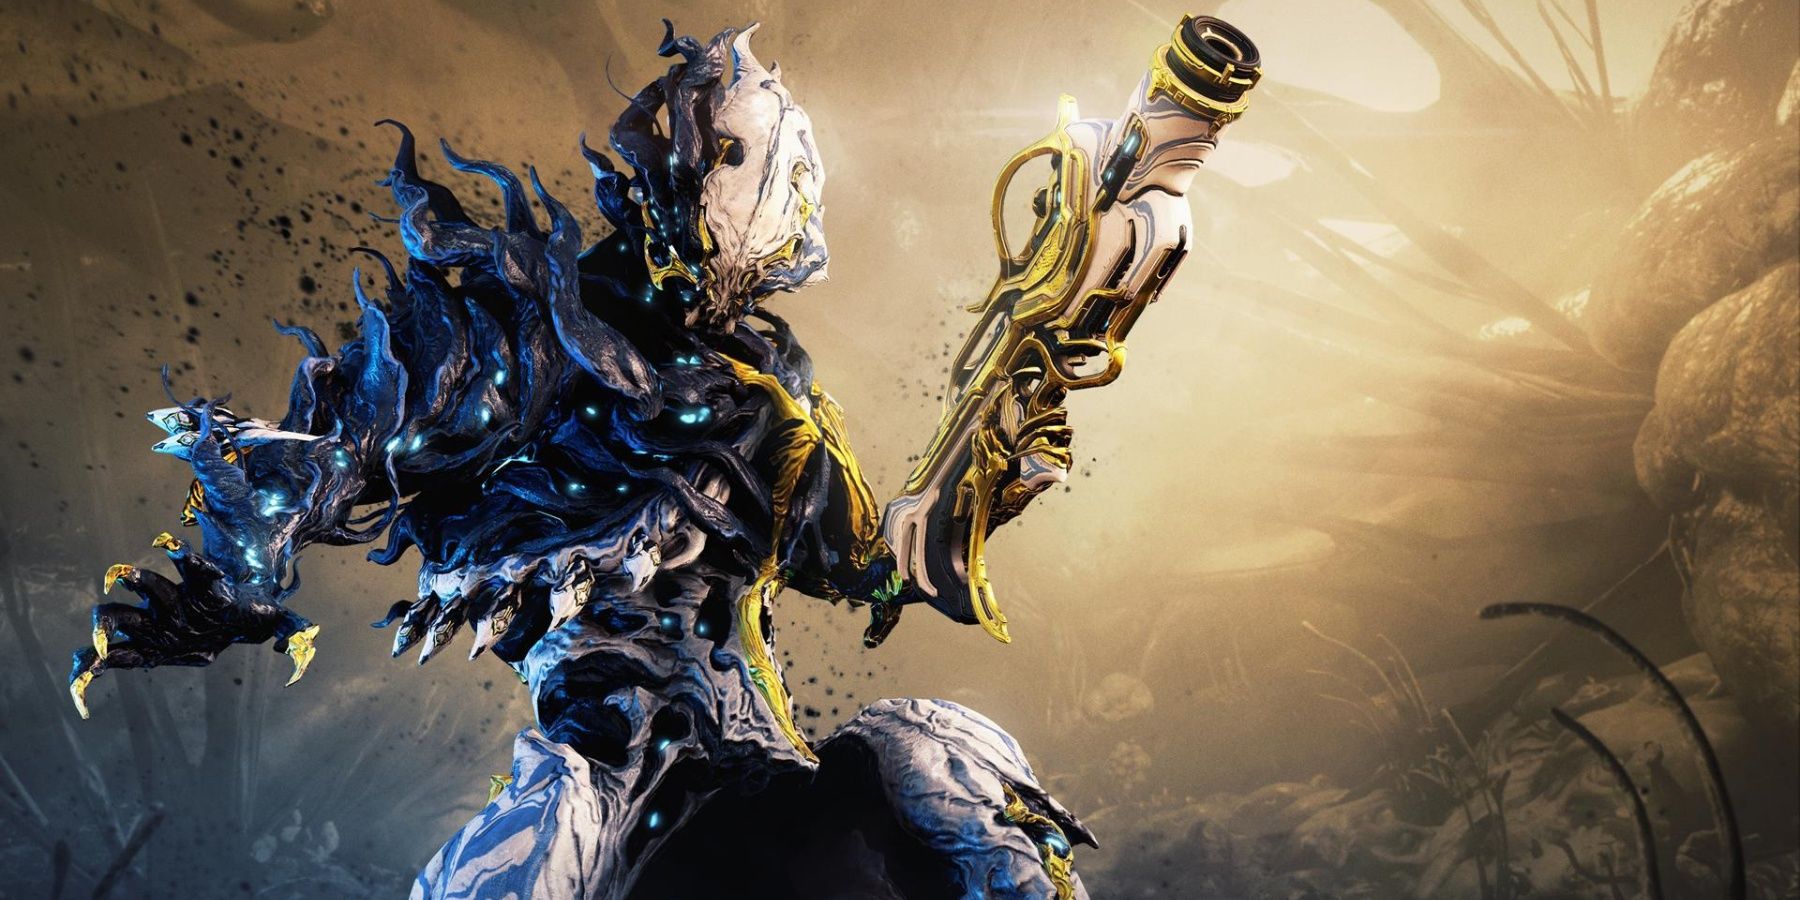 How-to-get-Nidus-Prime-Relics-in-Warframe-and-start-Plague-Star-2021